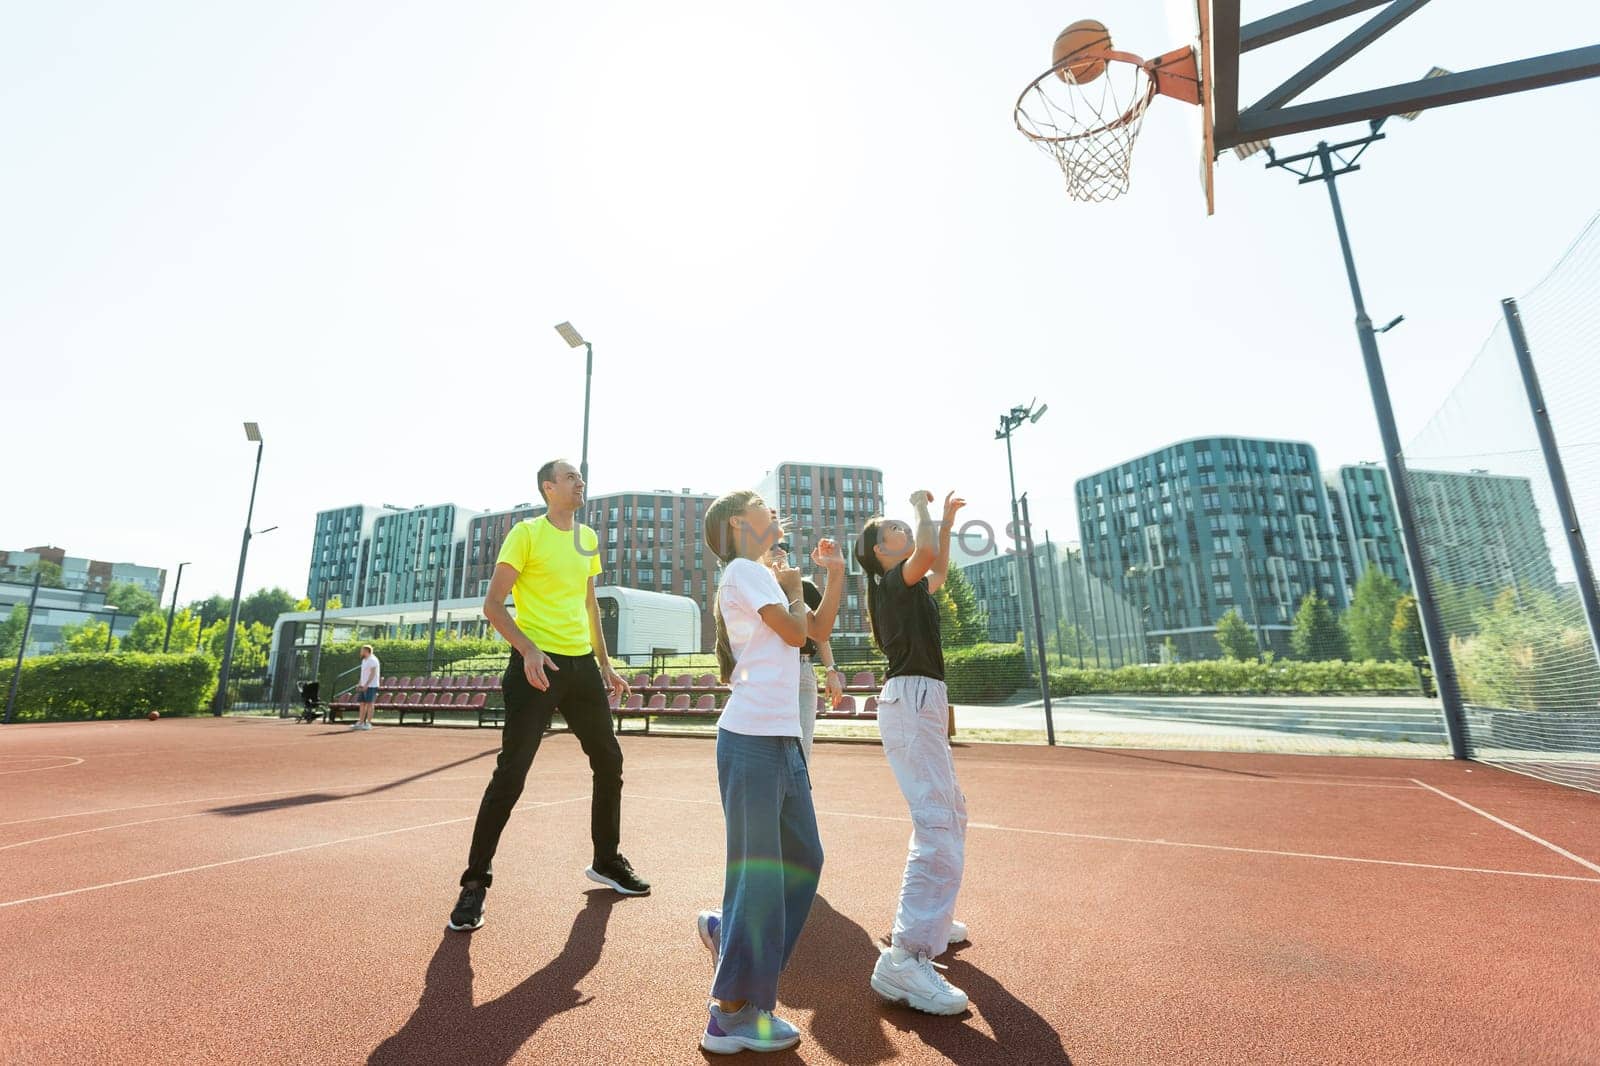 summer holidays, sport and people concept - happy family with ball playing on basketball playground by Andelov13